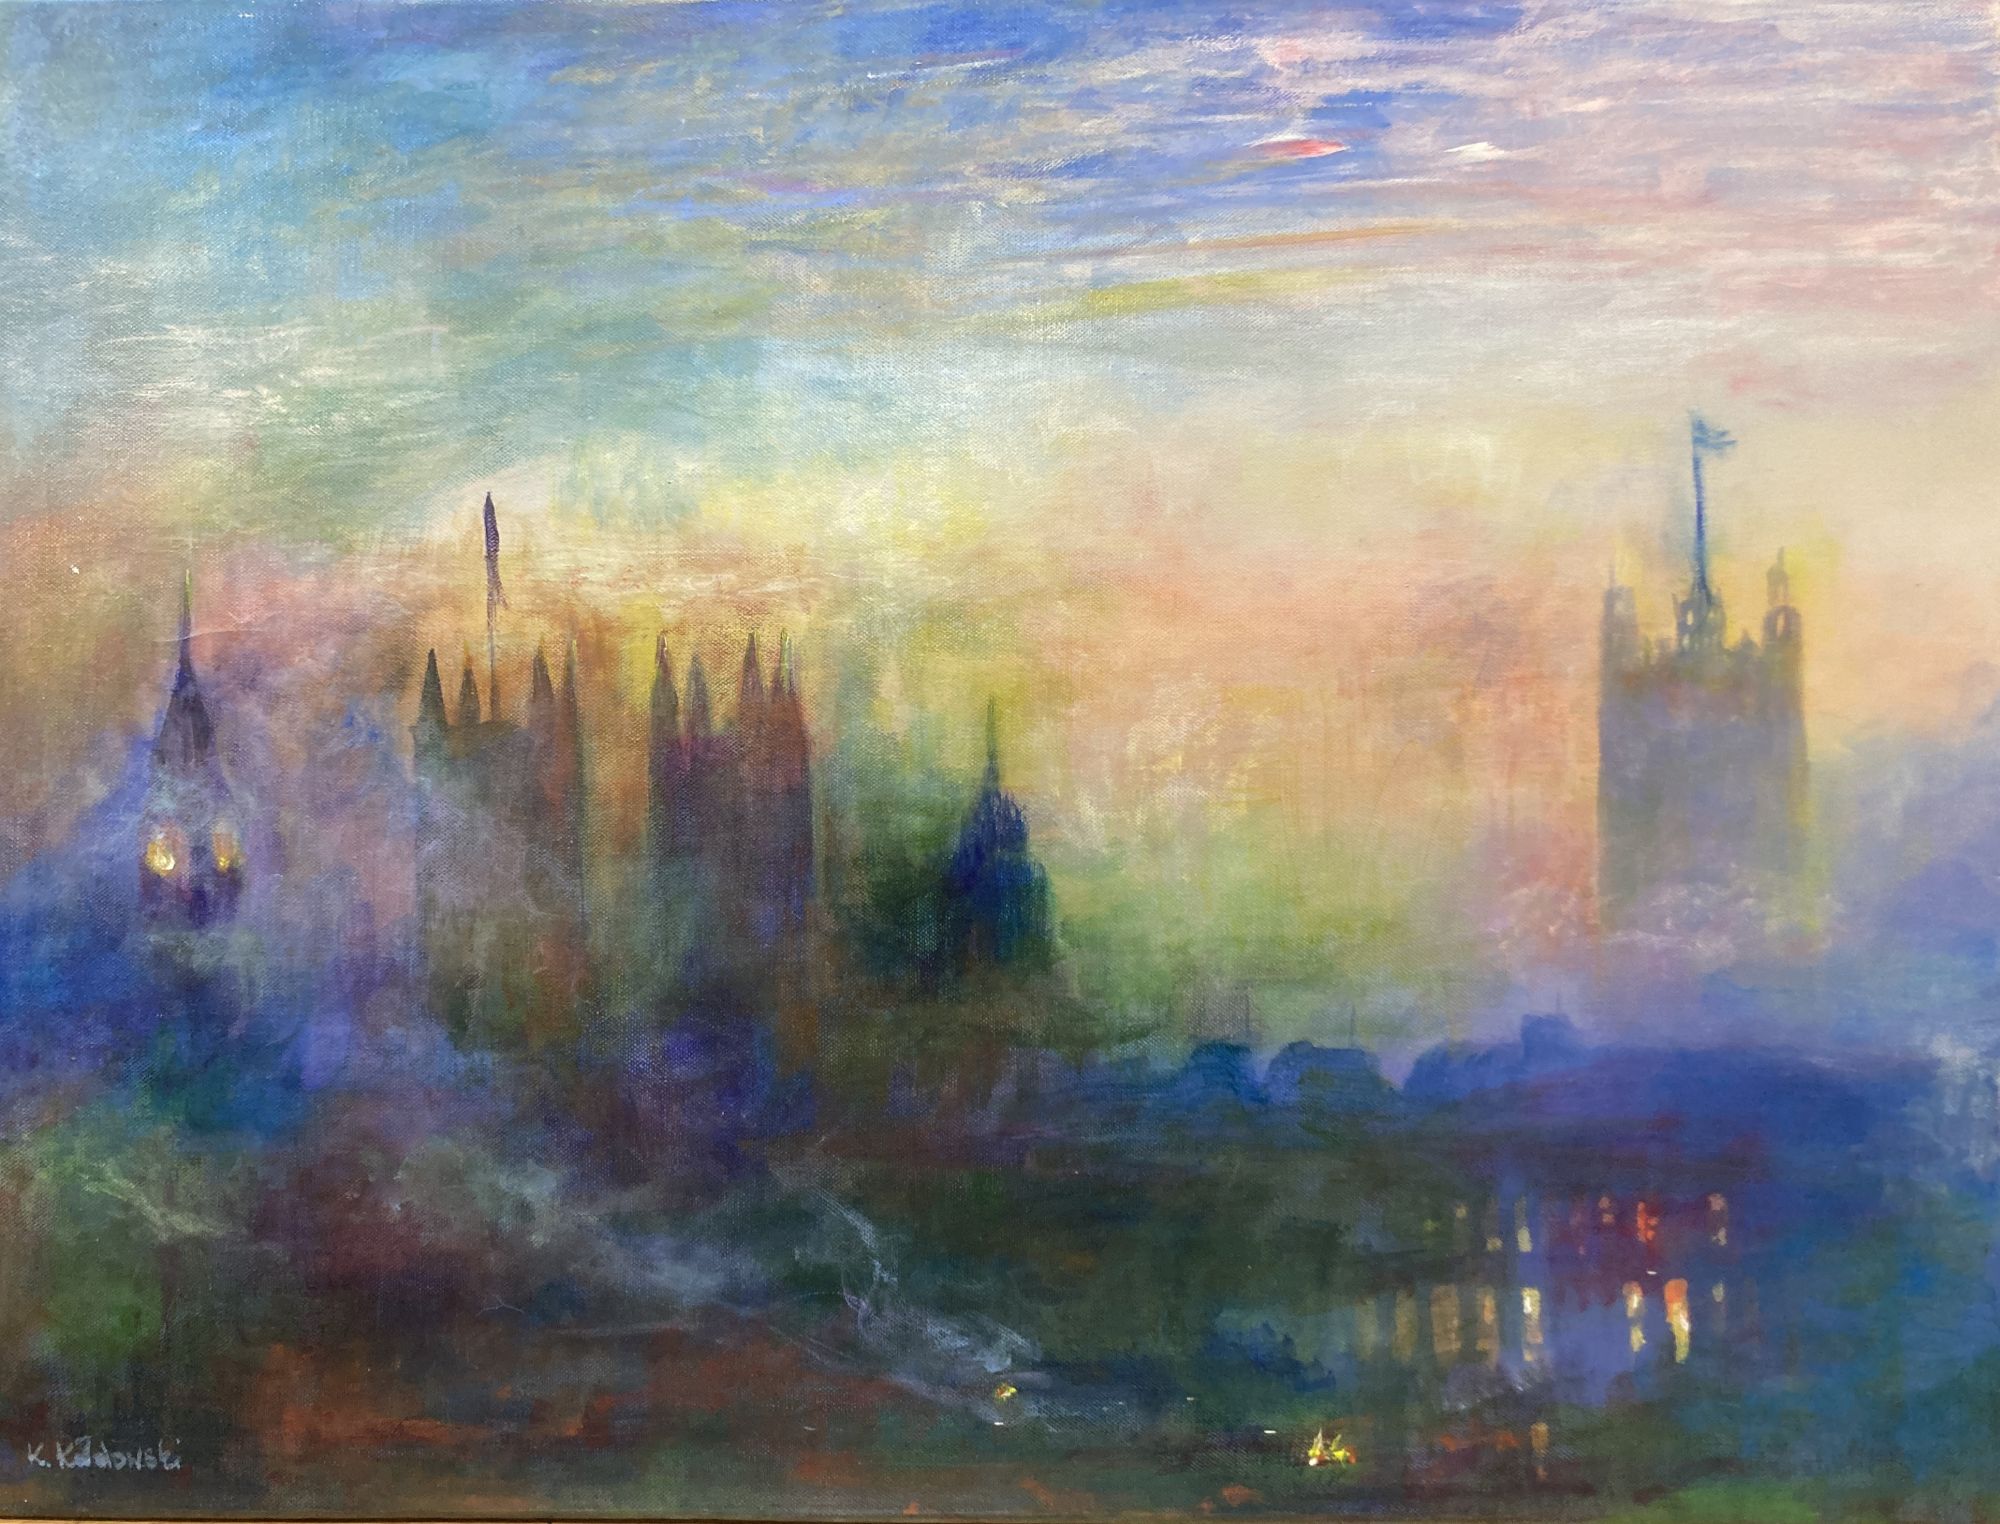 Koldowski, oil on canvas, View of the Houses of Parliament, signed and dated '05, 60 x 80cm,